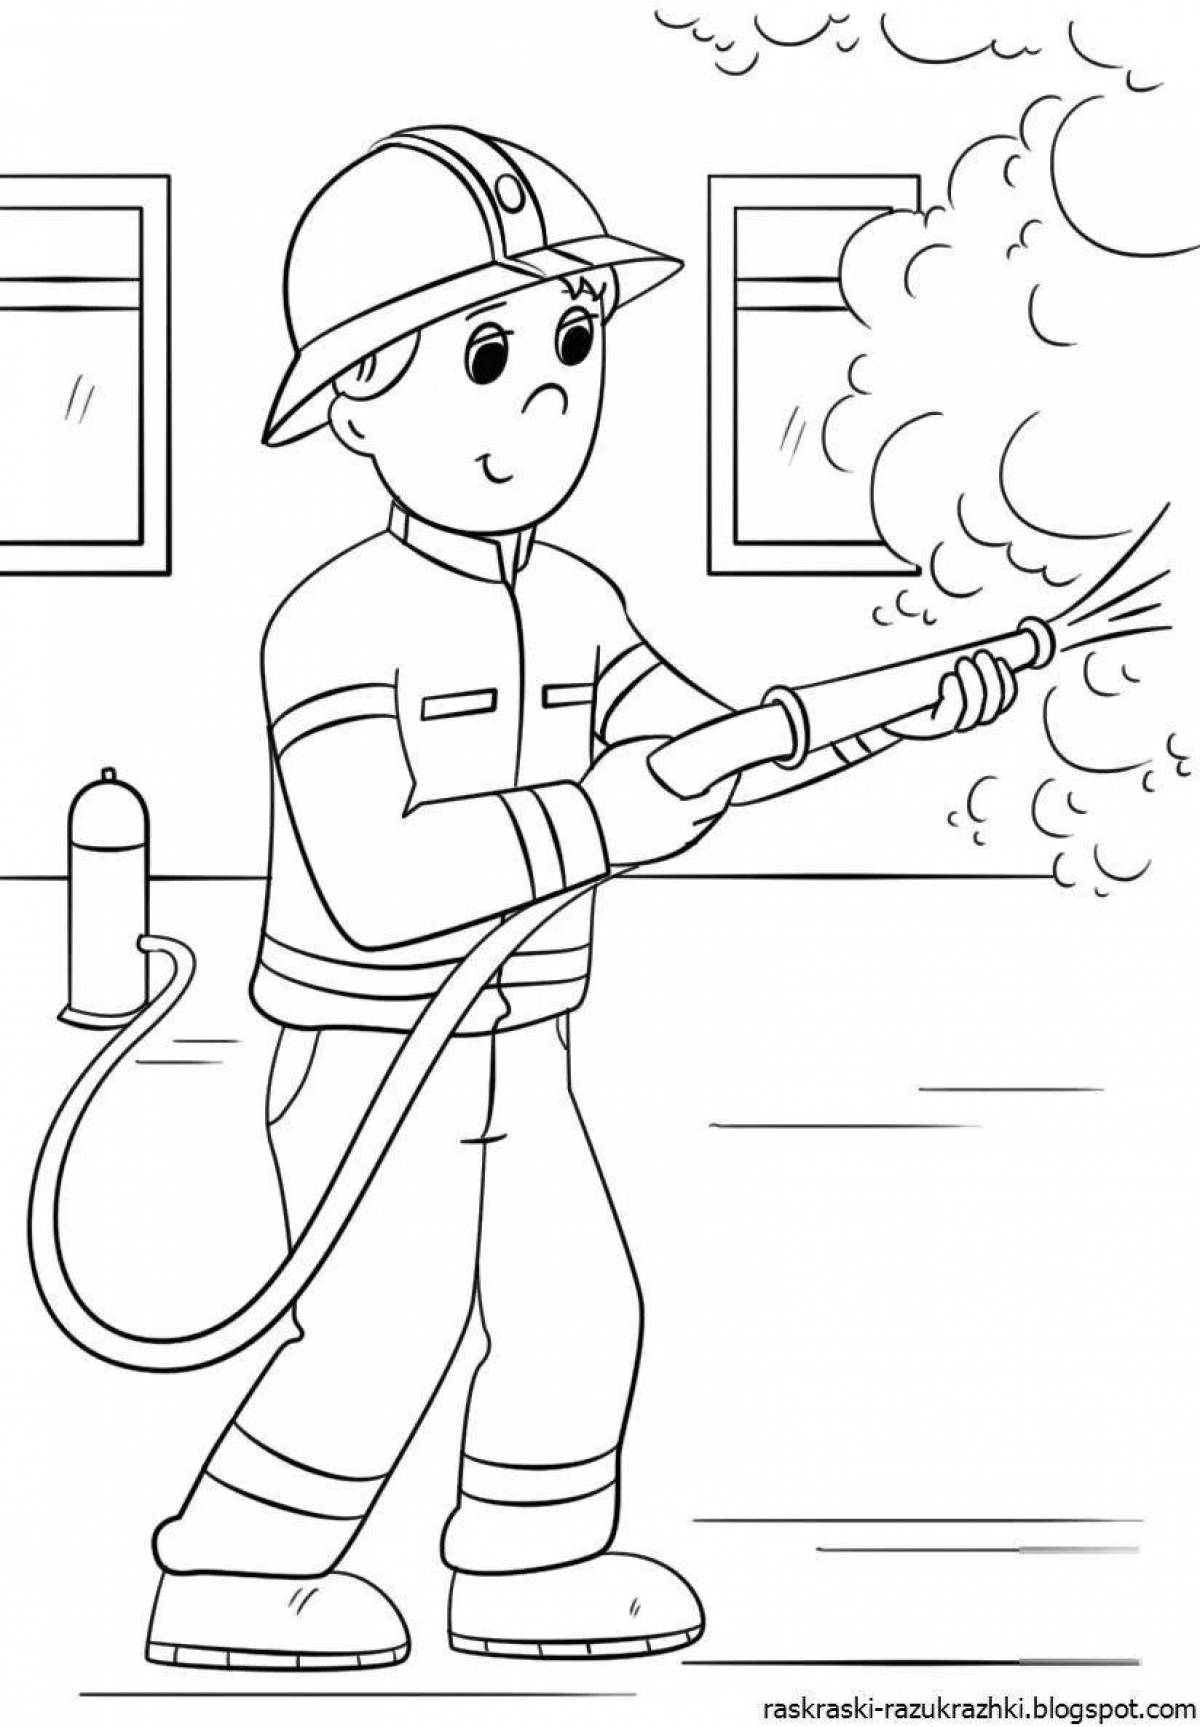 Inspirational fire safety coloring book